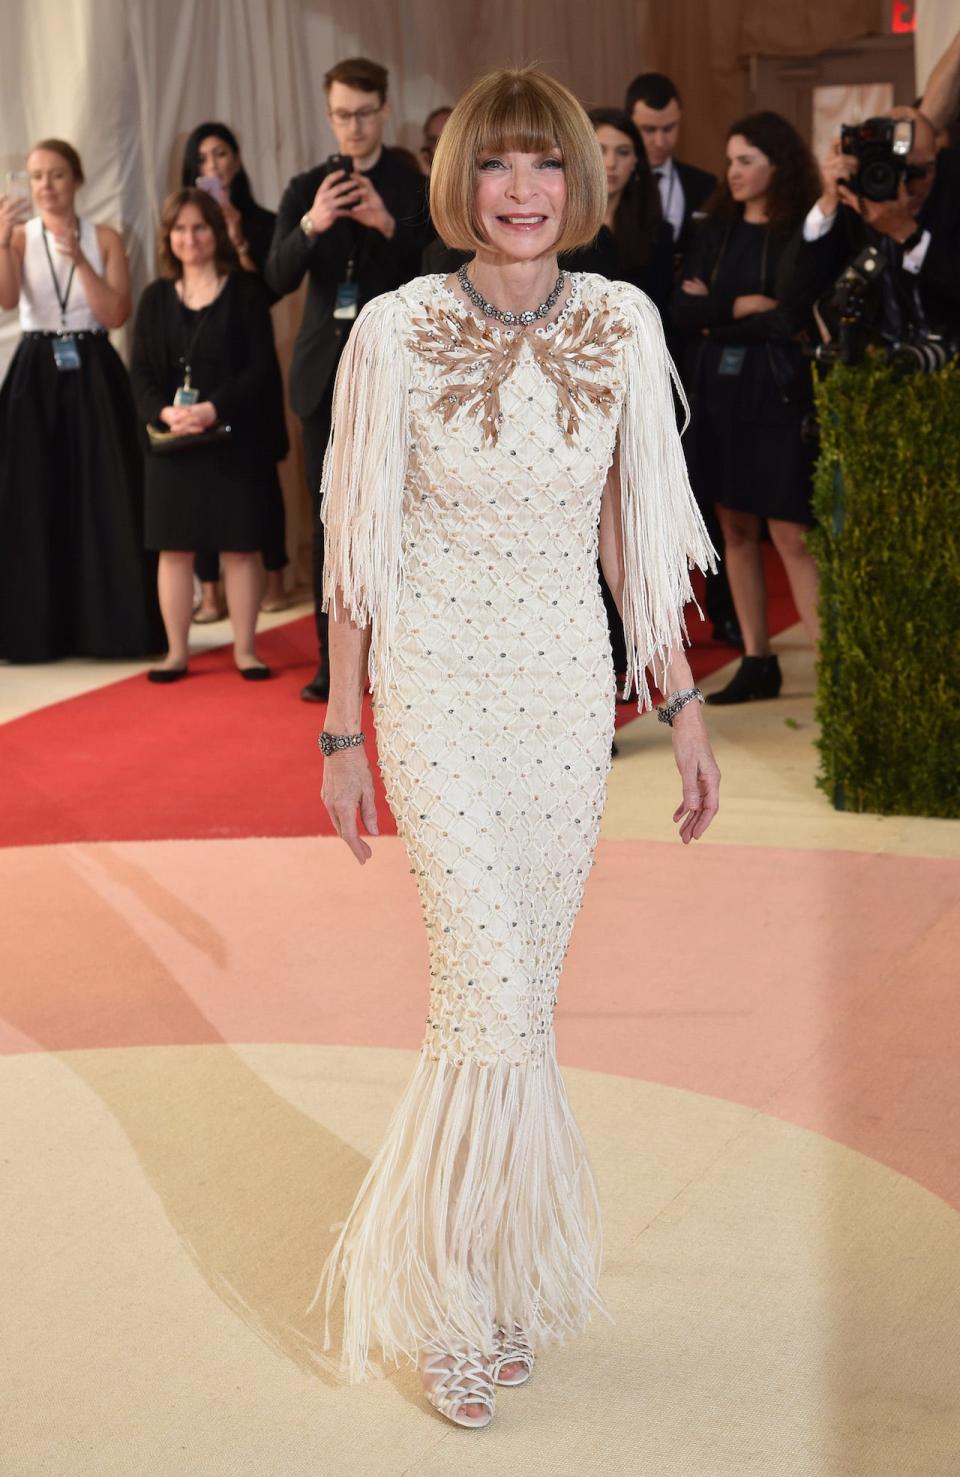 Anna Wintour at the 2016 Met Gala.